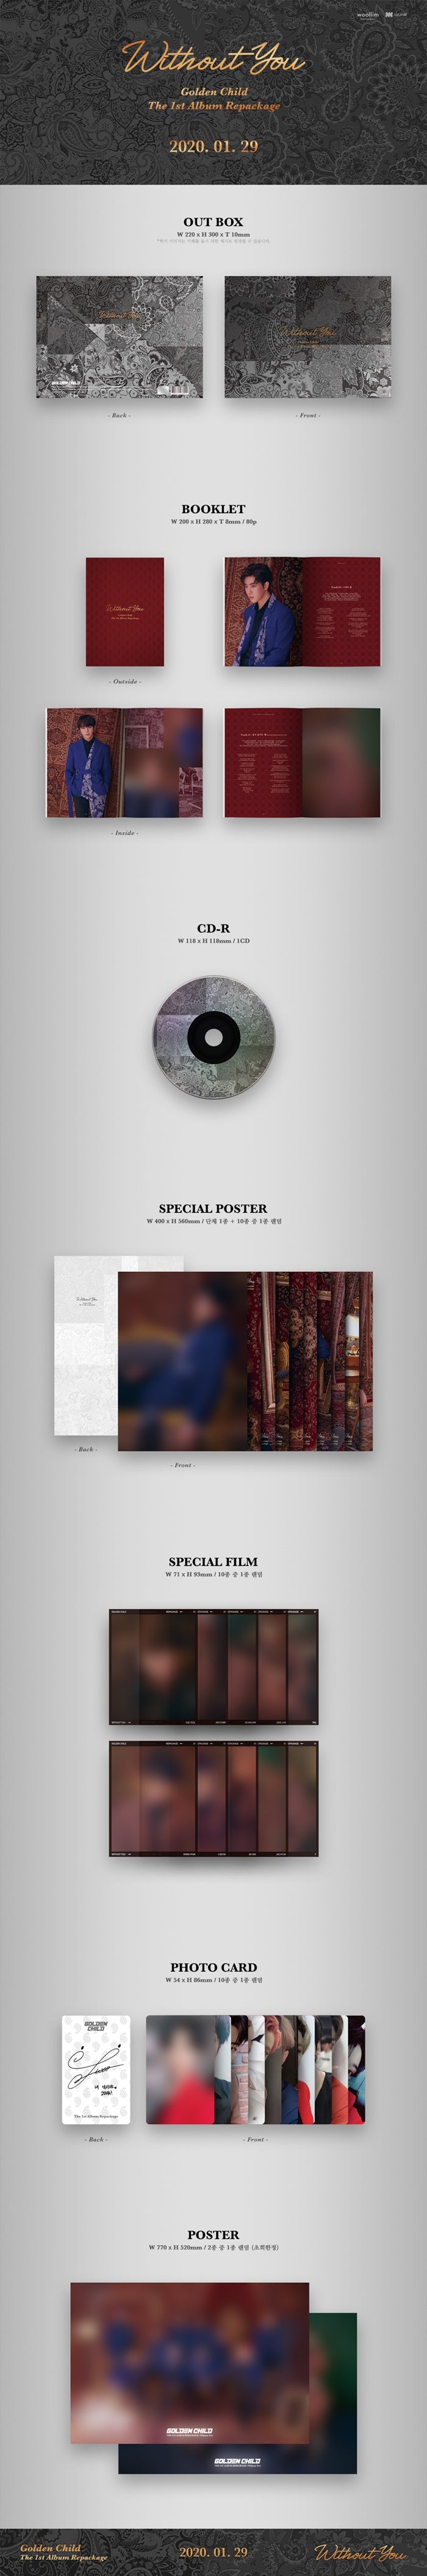 1 CD
1 Special Poster 
1 Booklet (80 pages)
1 Special Film
1 Photo Card